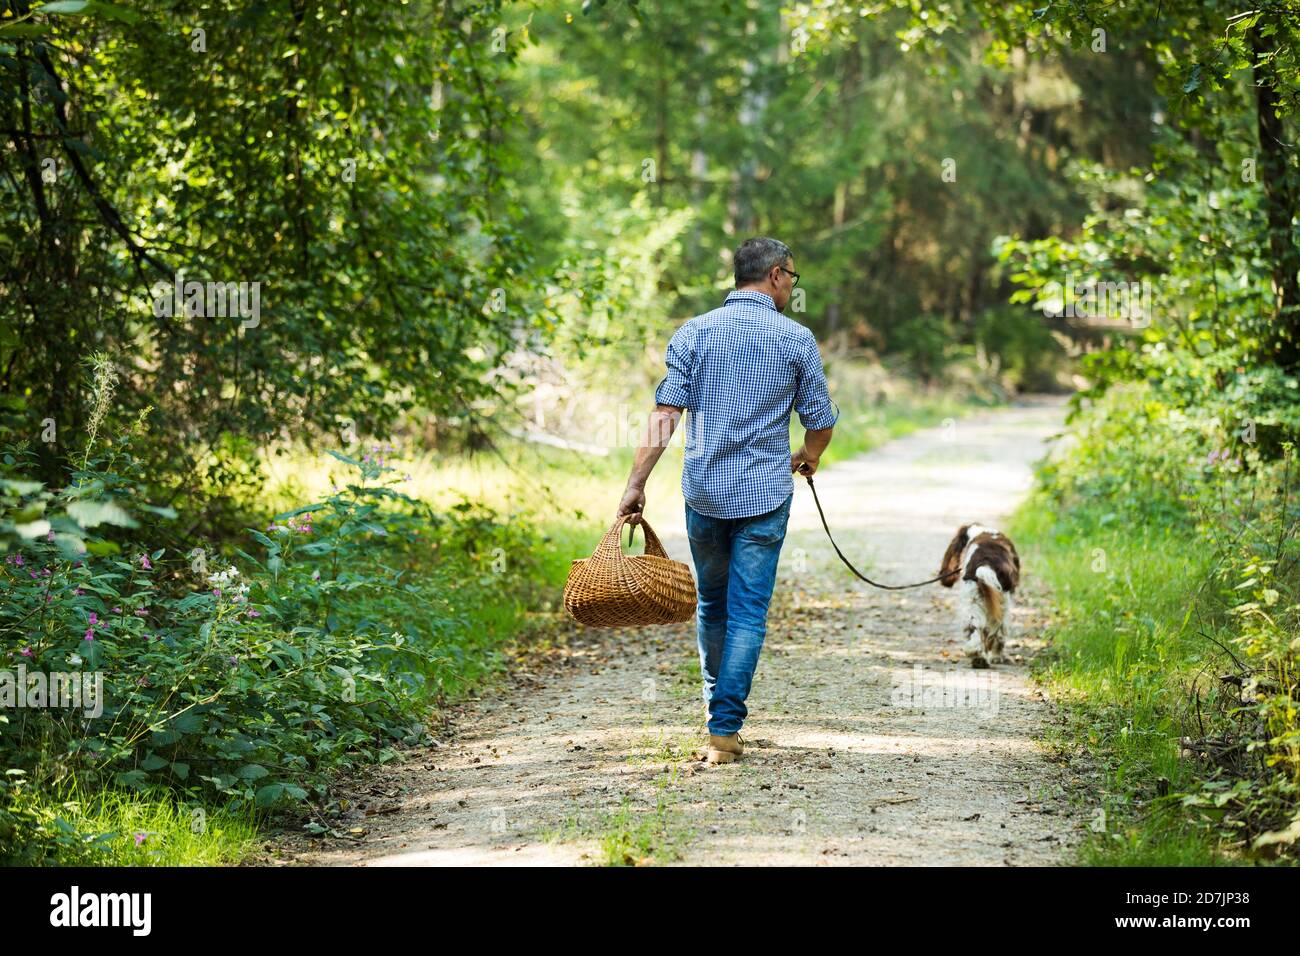 Mature man holding basket of mushroom while walking with dog in forest Stock Photo